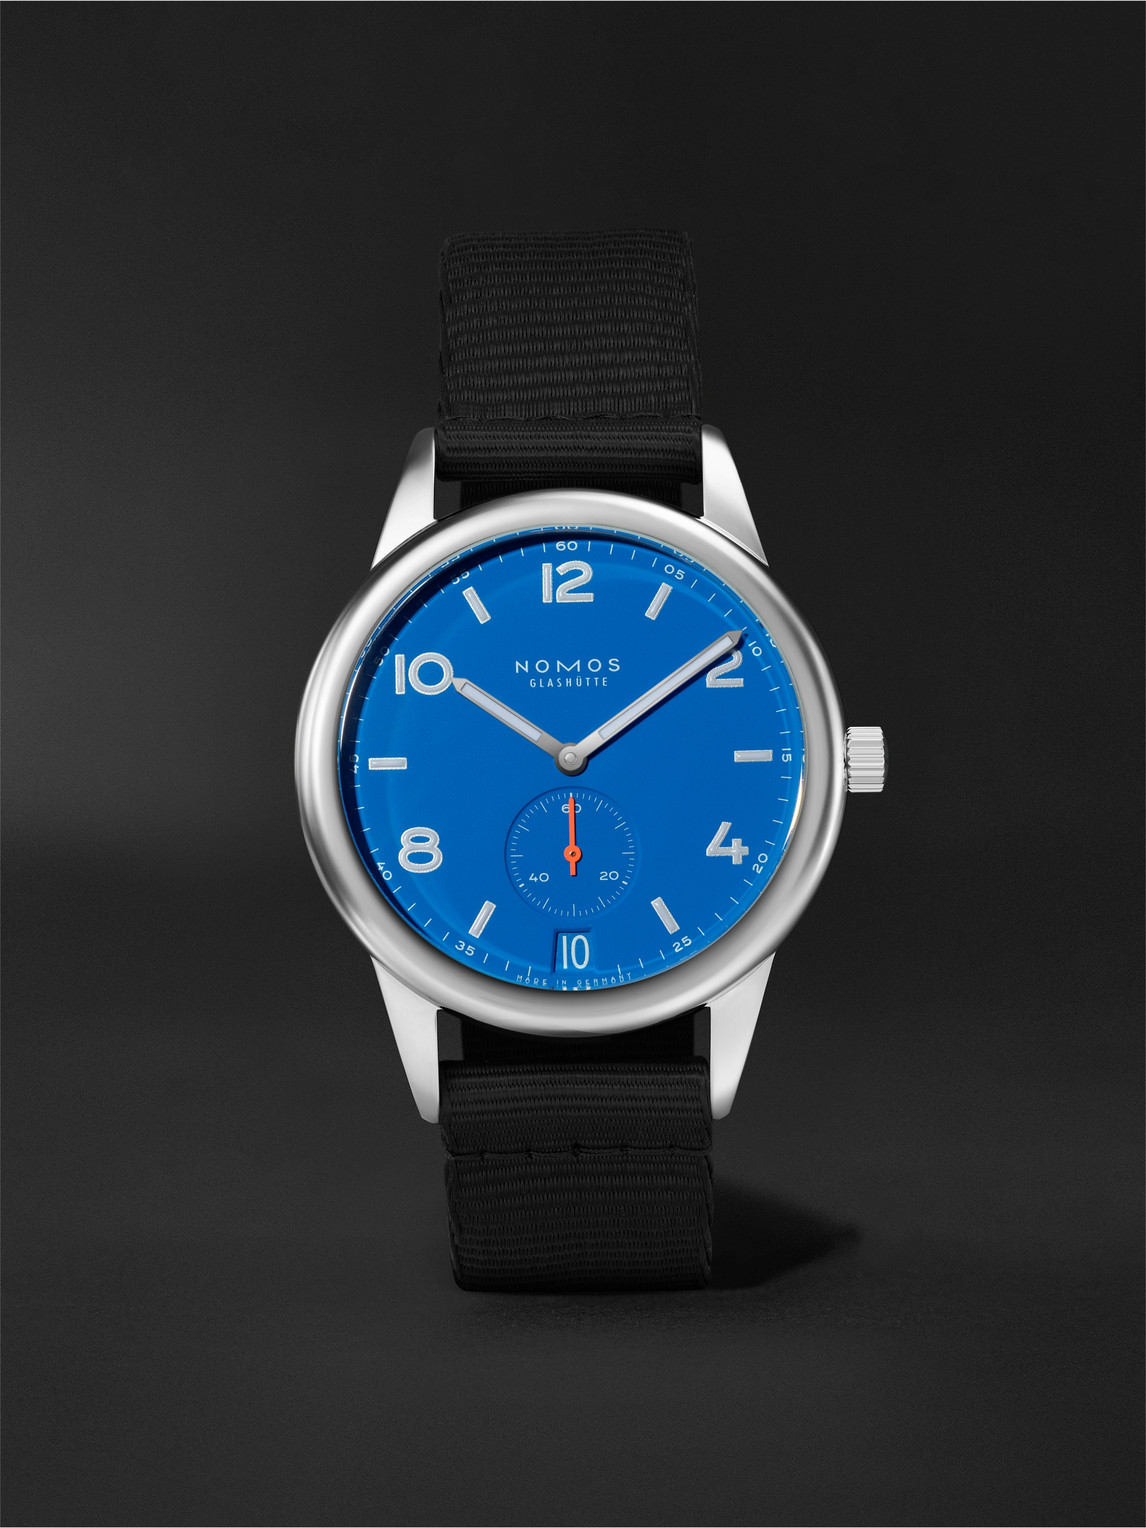 Nomos Glashütte Club Automatic 41.5mm Stainless Steel And Nylon Watch, Ref. No. 777 In Blue